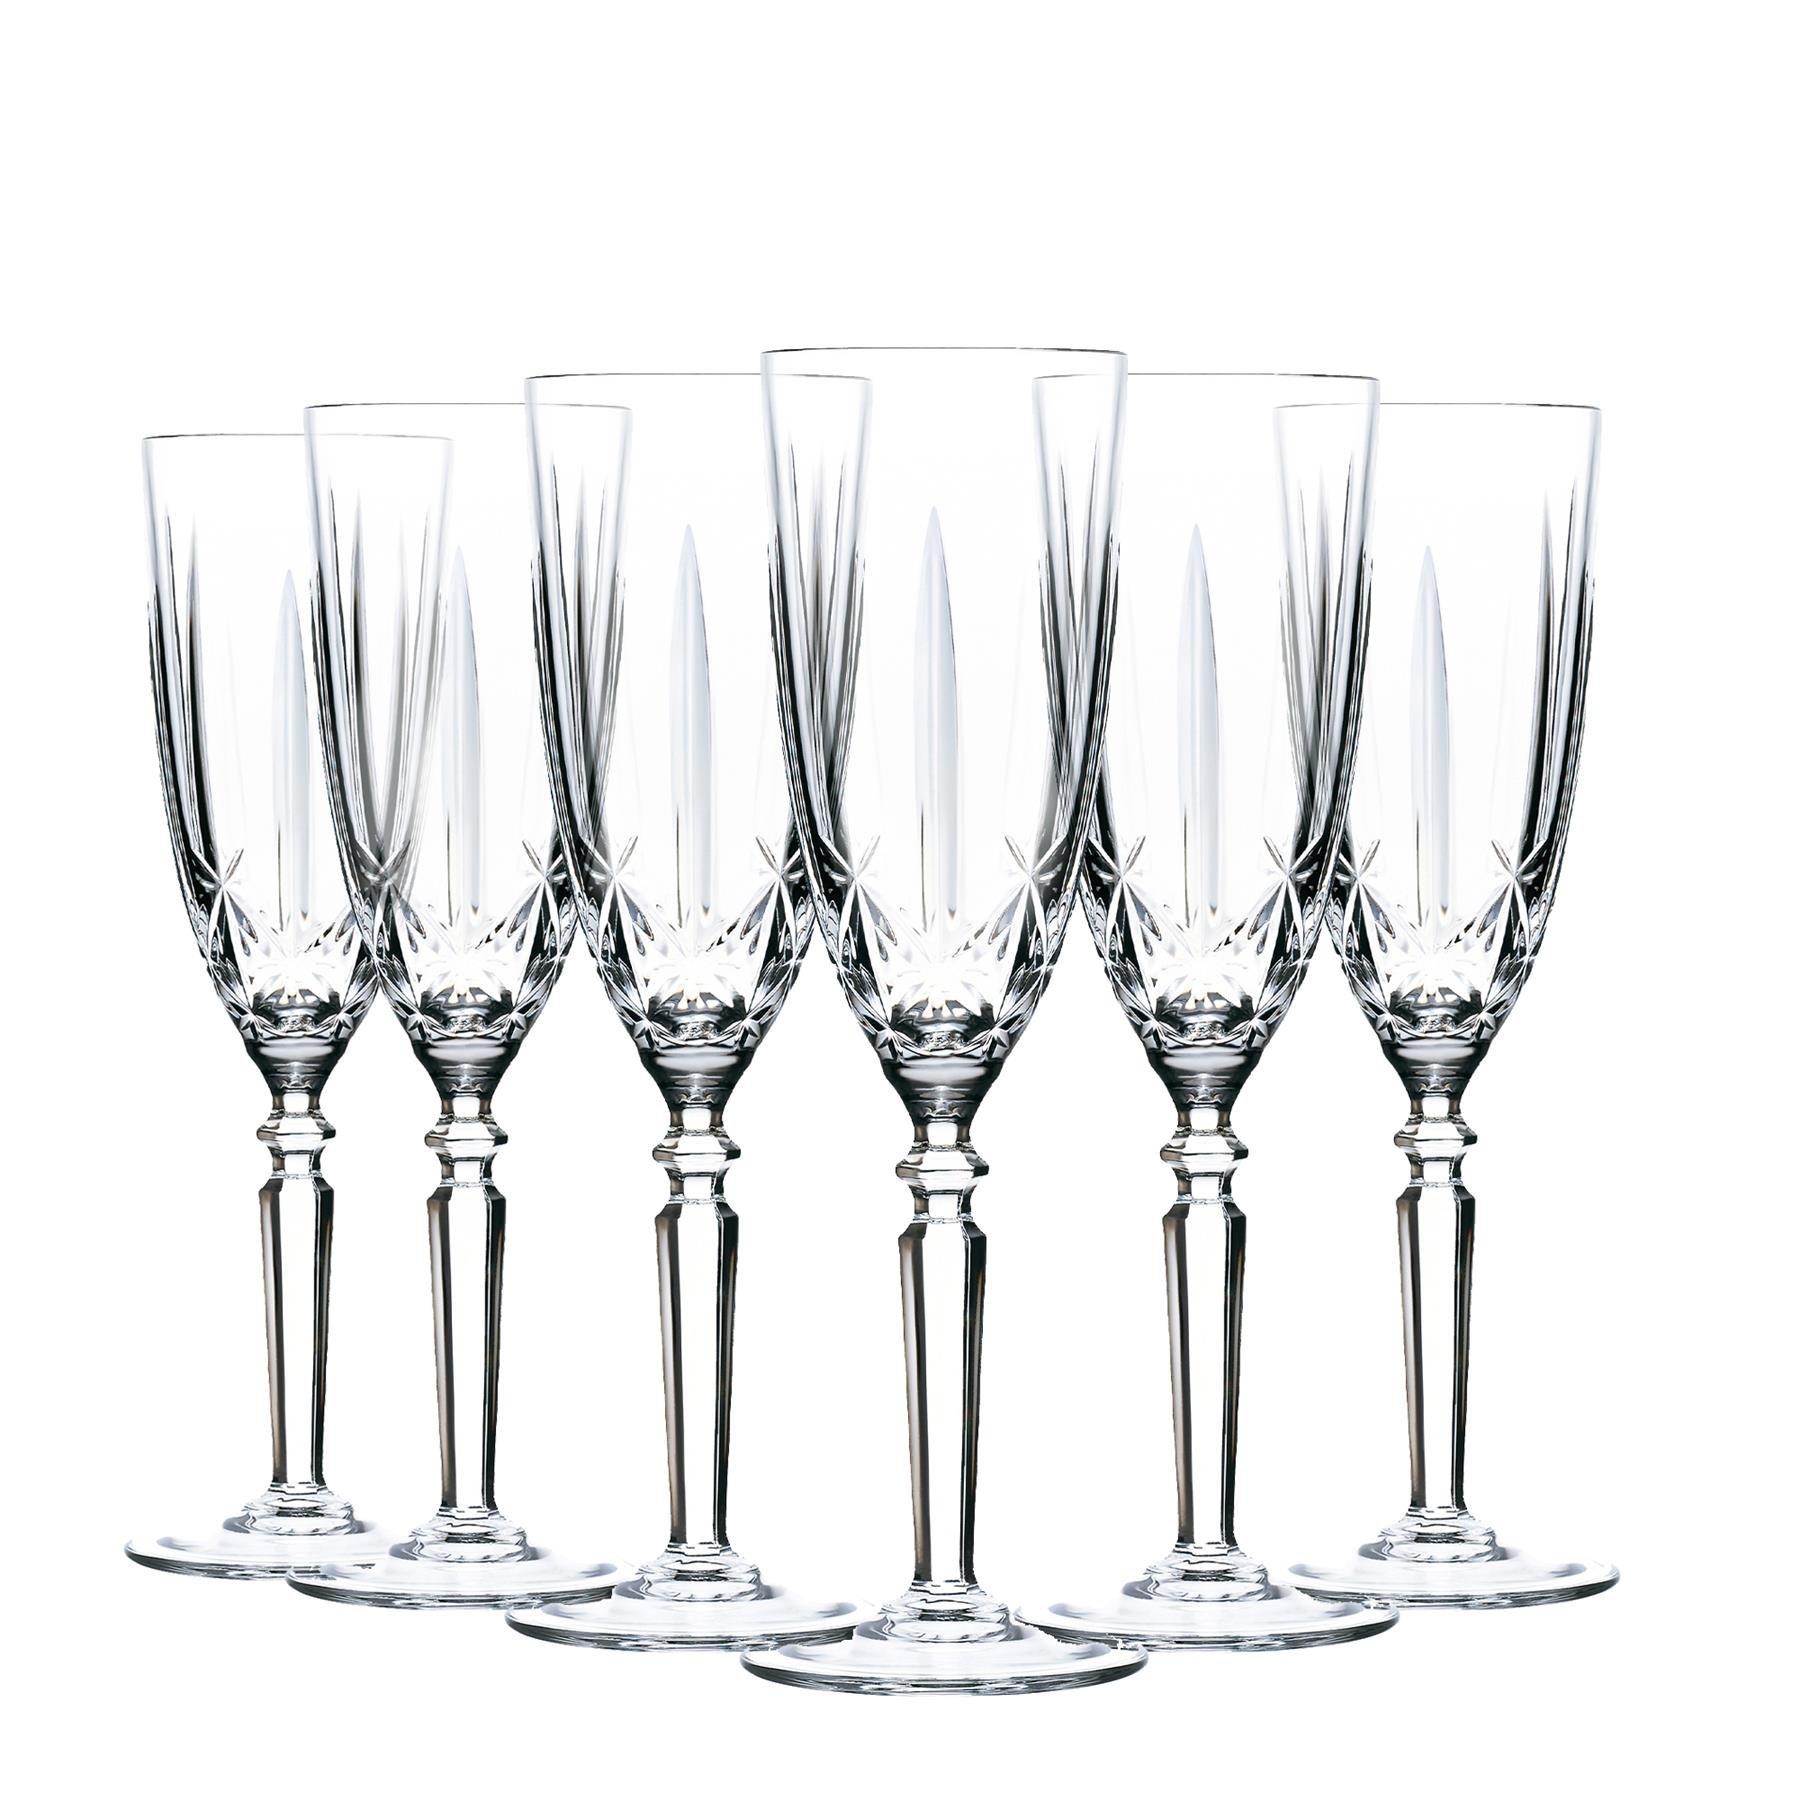 Orchestra Cut Glass Champagne Flutes Glasses Set 200ml Pack of 12